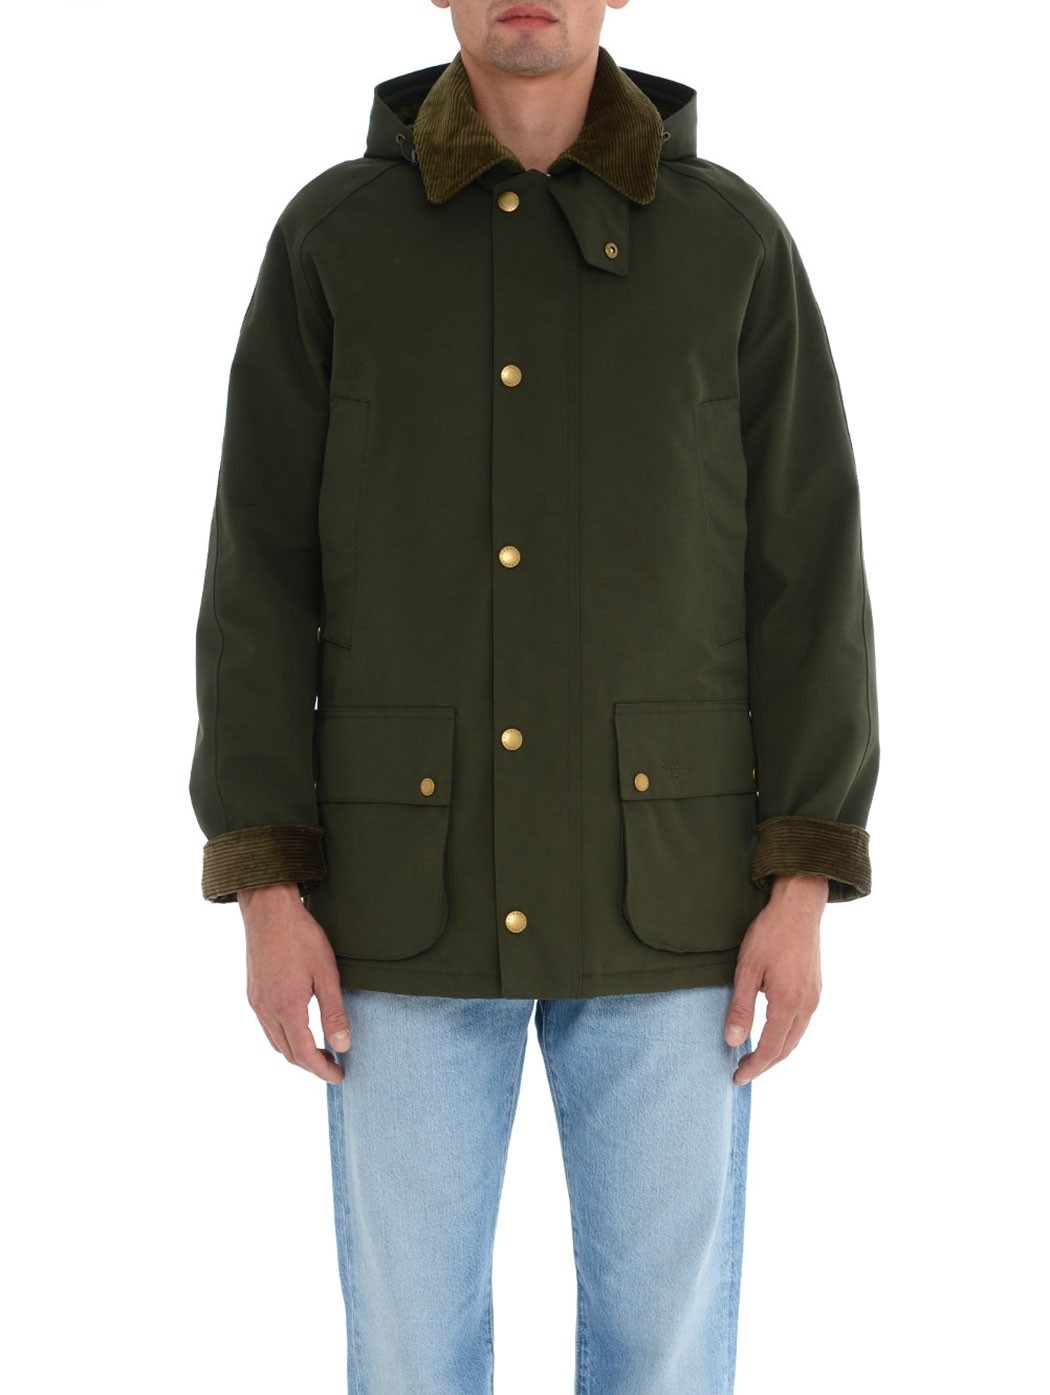  MAN DOWN JACKET,MONCLER DOWN JACKET,HERNO DOWN JACKET,WOOLRICH DOWN JACKET  BARBOUR MWB1001